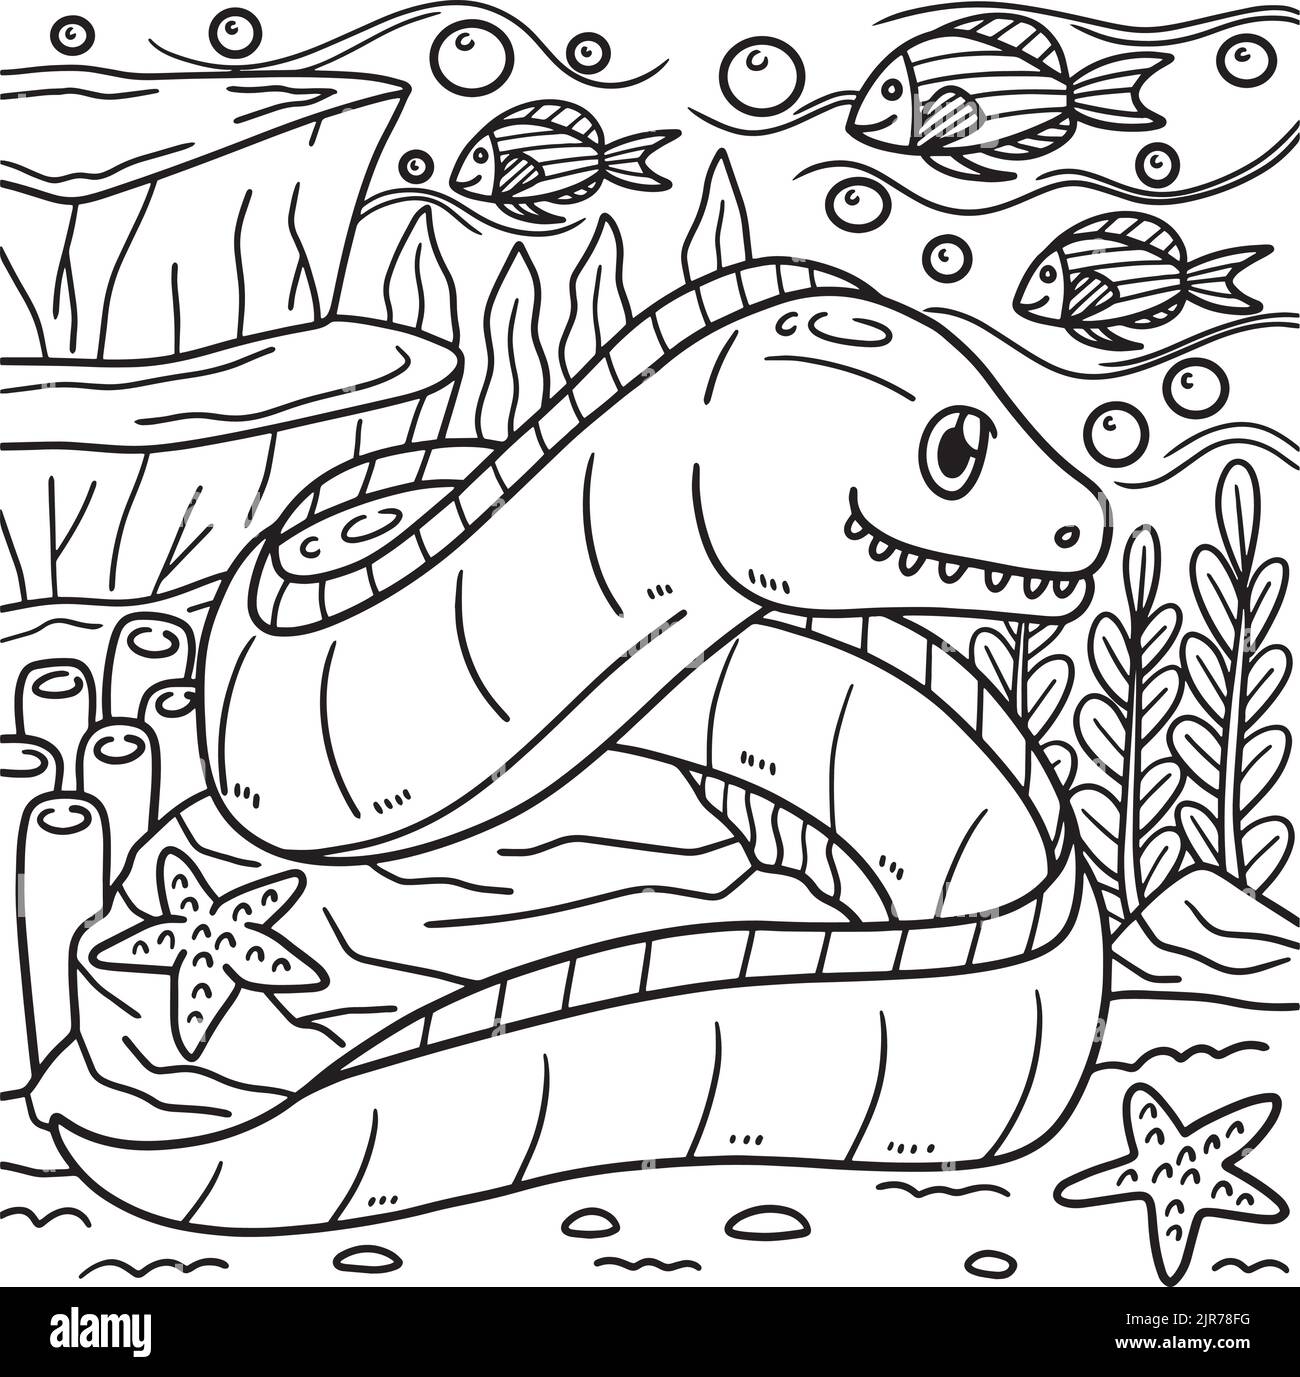 Eel Coloring Page for Kids Stock Vector